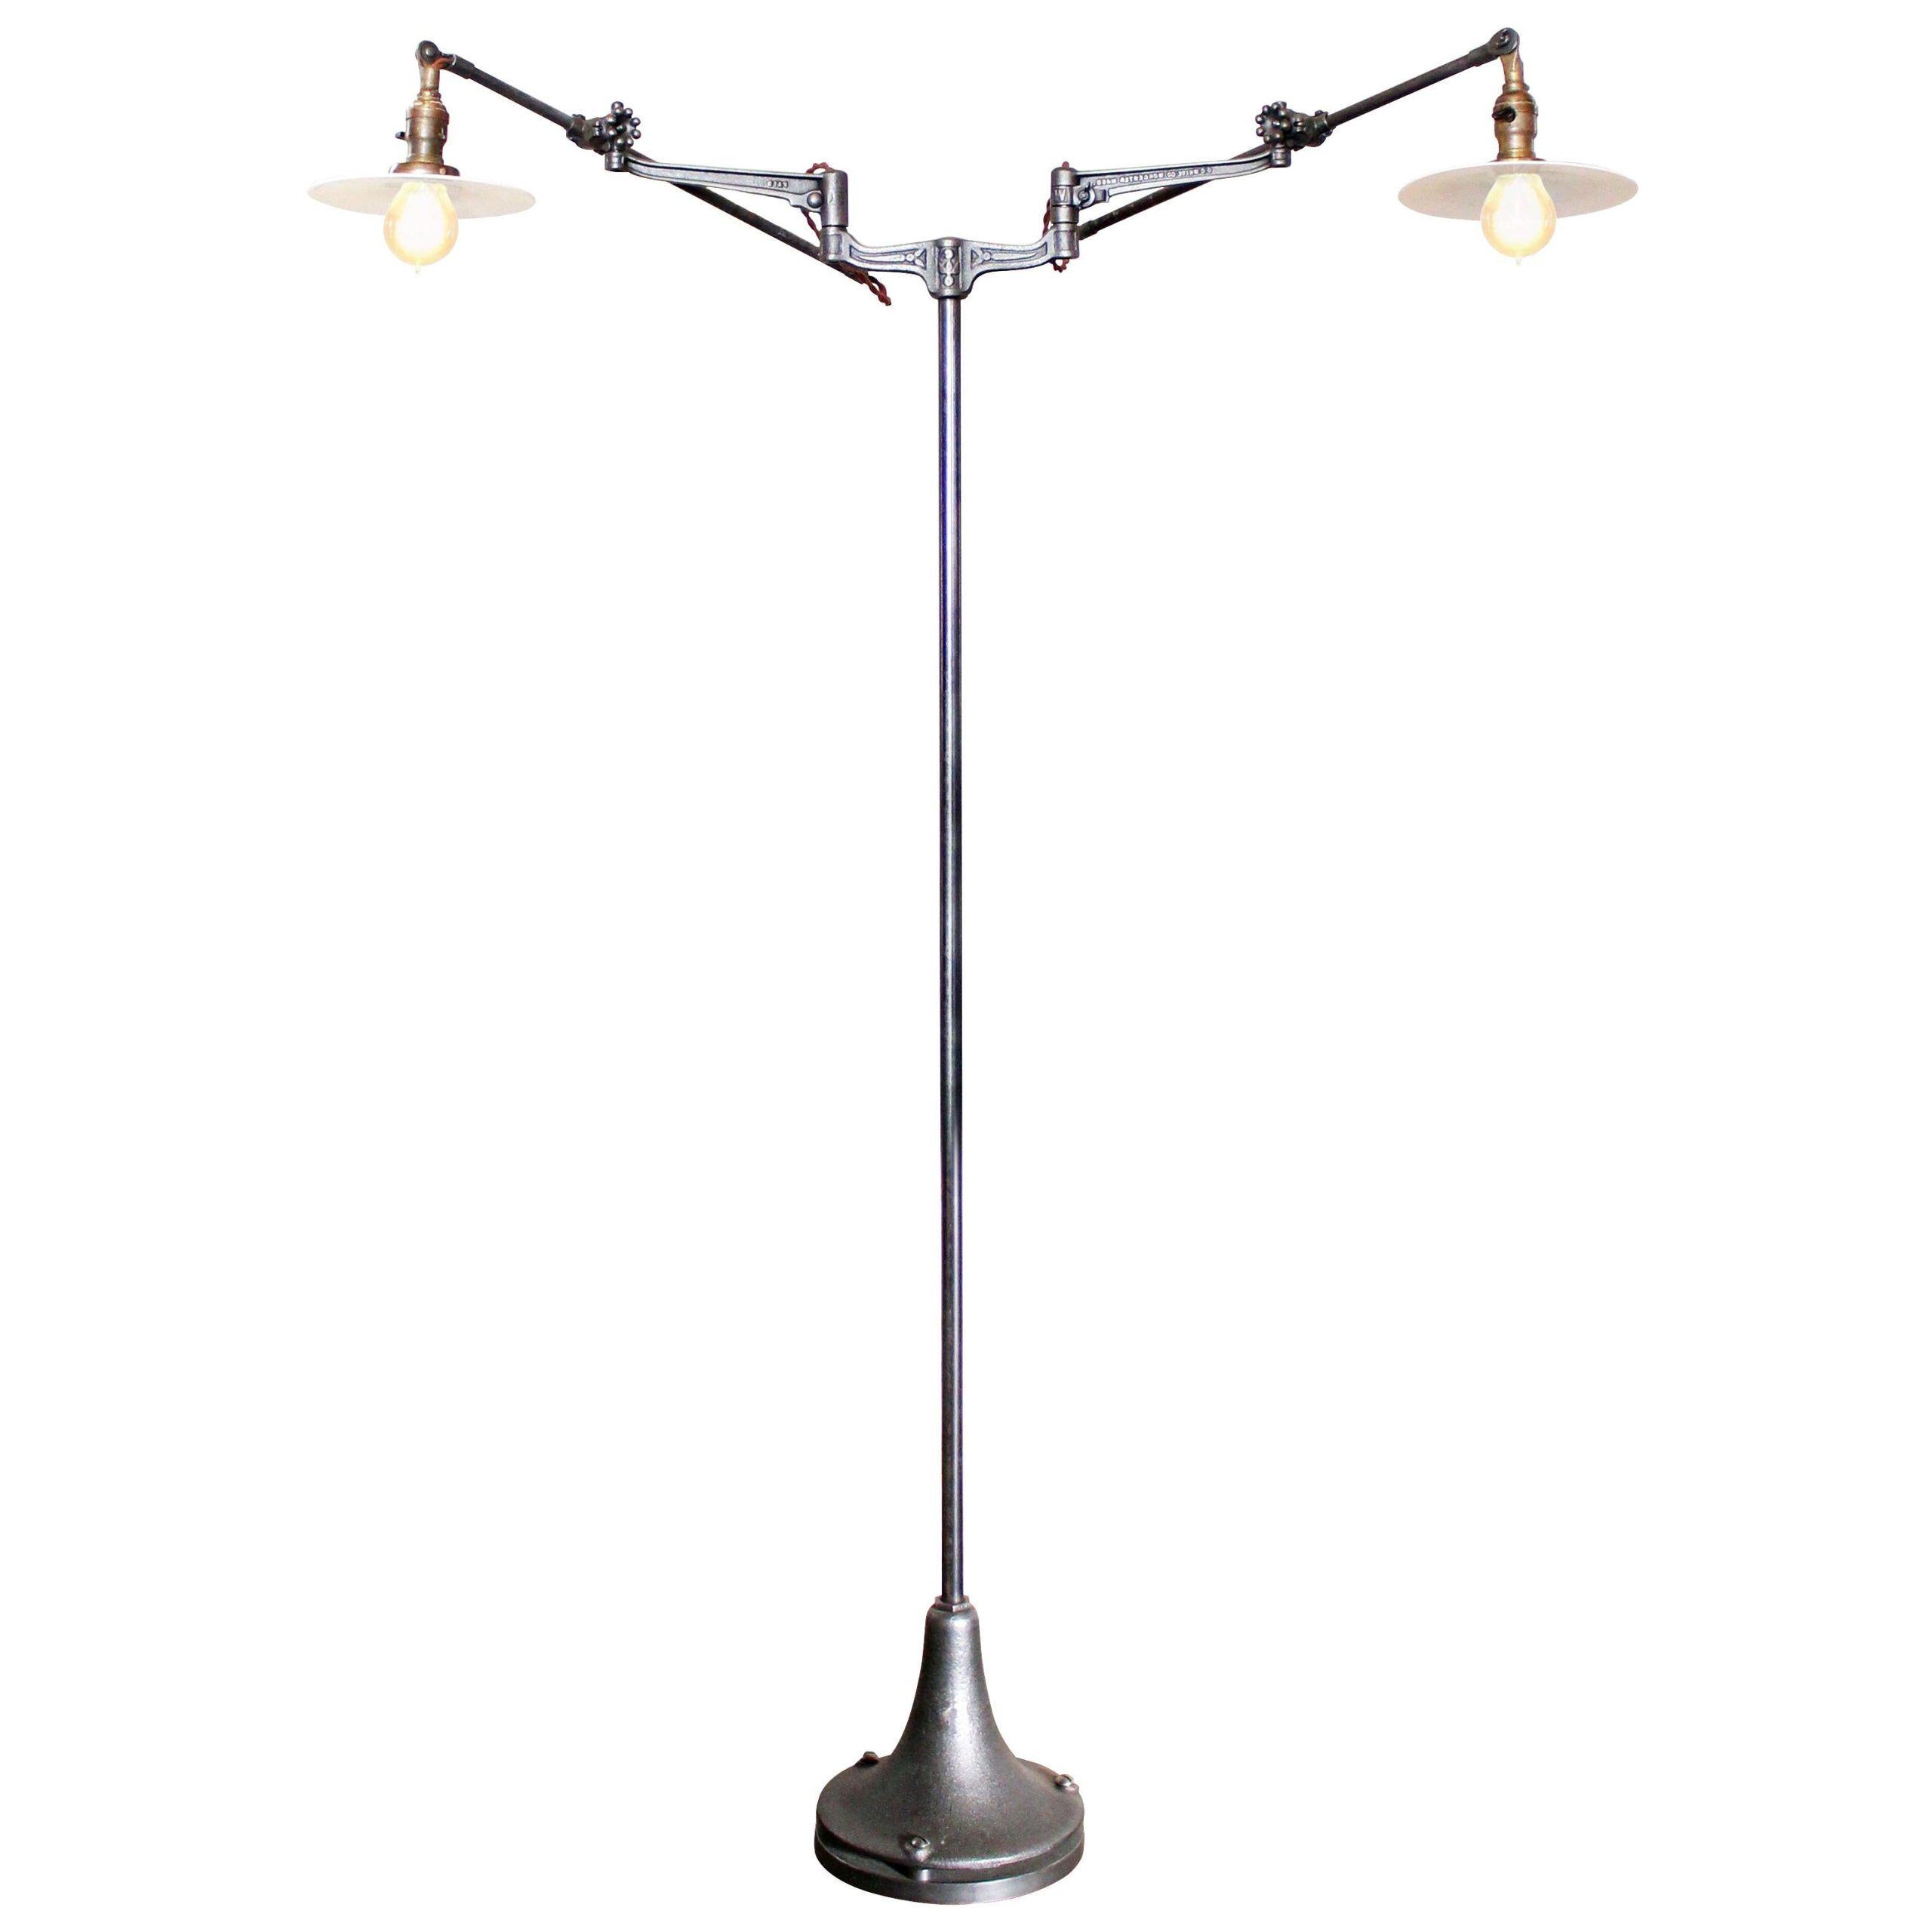 Double Arm Milk Glass Reading Lamp Adjustable Cast Iron Vintage Factory  Lighting For Sale At 1stdibs | Adjustable Arms Factory, Adjustable Reading  Lamp Factory, Glass Reading Light Intended For 2 Arm Floor Lamps (Gallery 19 of 20)